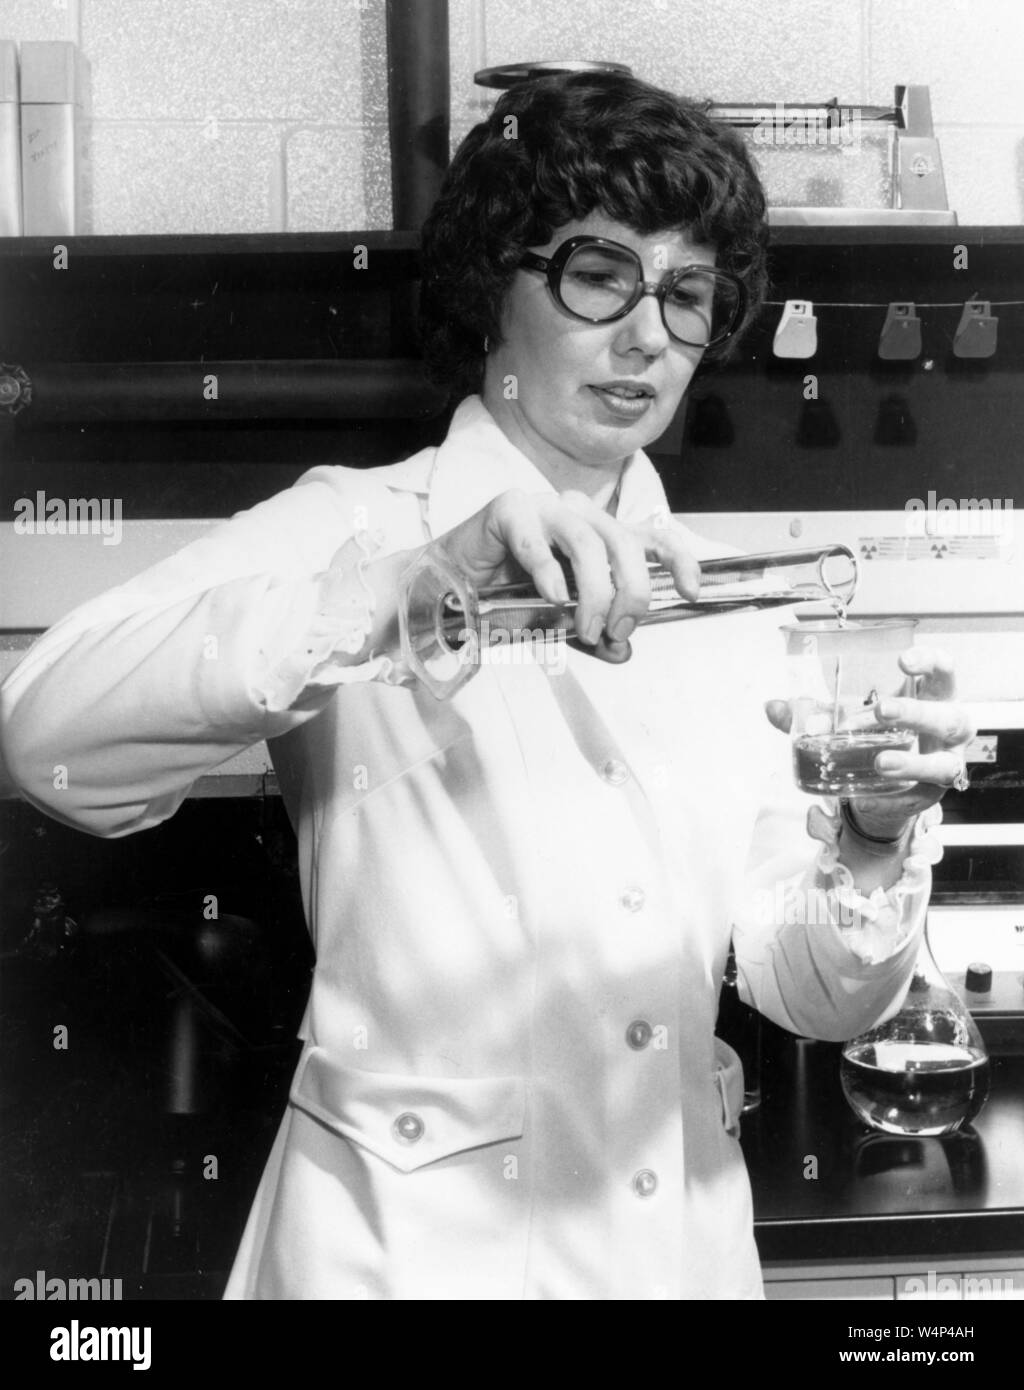 NASA chemist Barbara S Askins uses radioactive materials to develop astronomical and geological pictures at Marshall Space Flight Center, Huntsville, Alabama, 1978. Image courtesy National Aeronautics and Space Administration (NASA). () Stock Photo